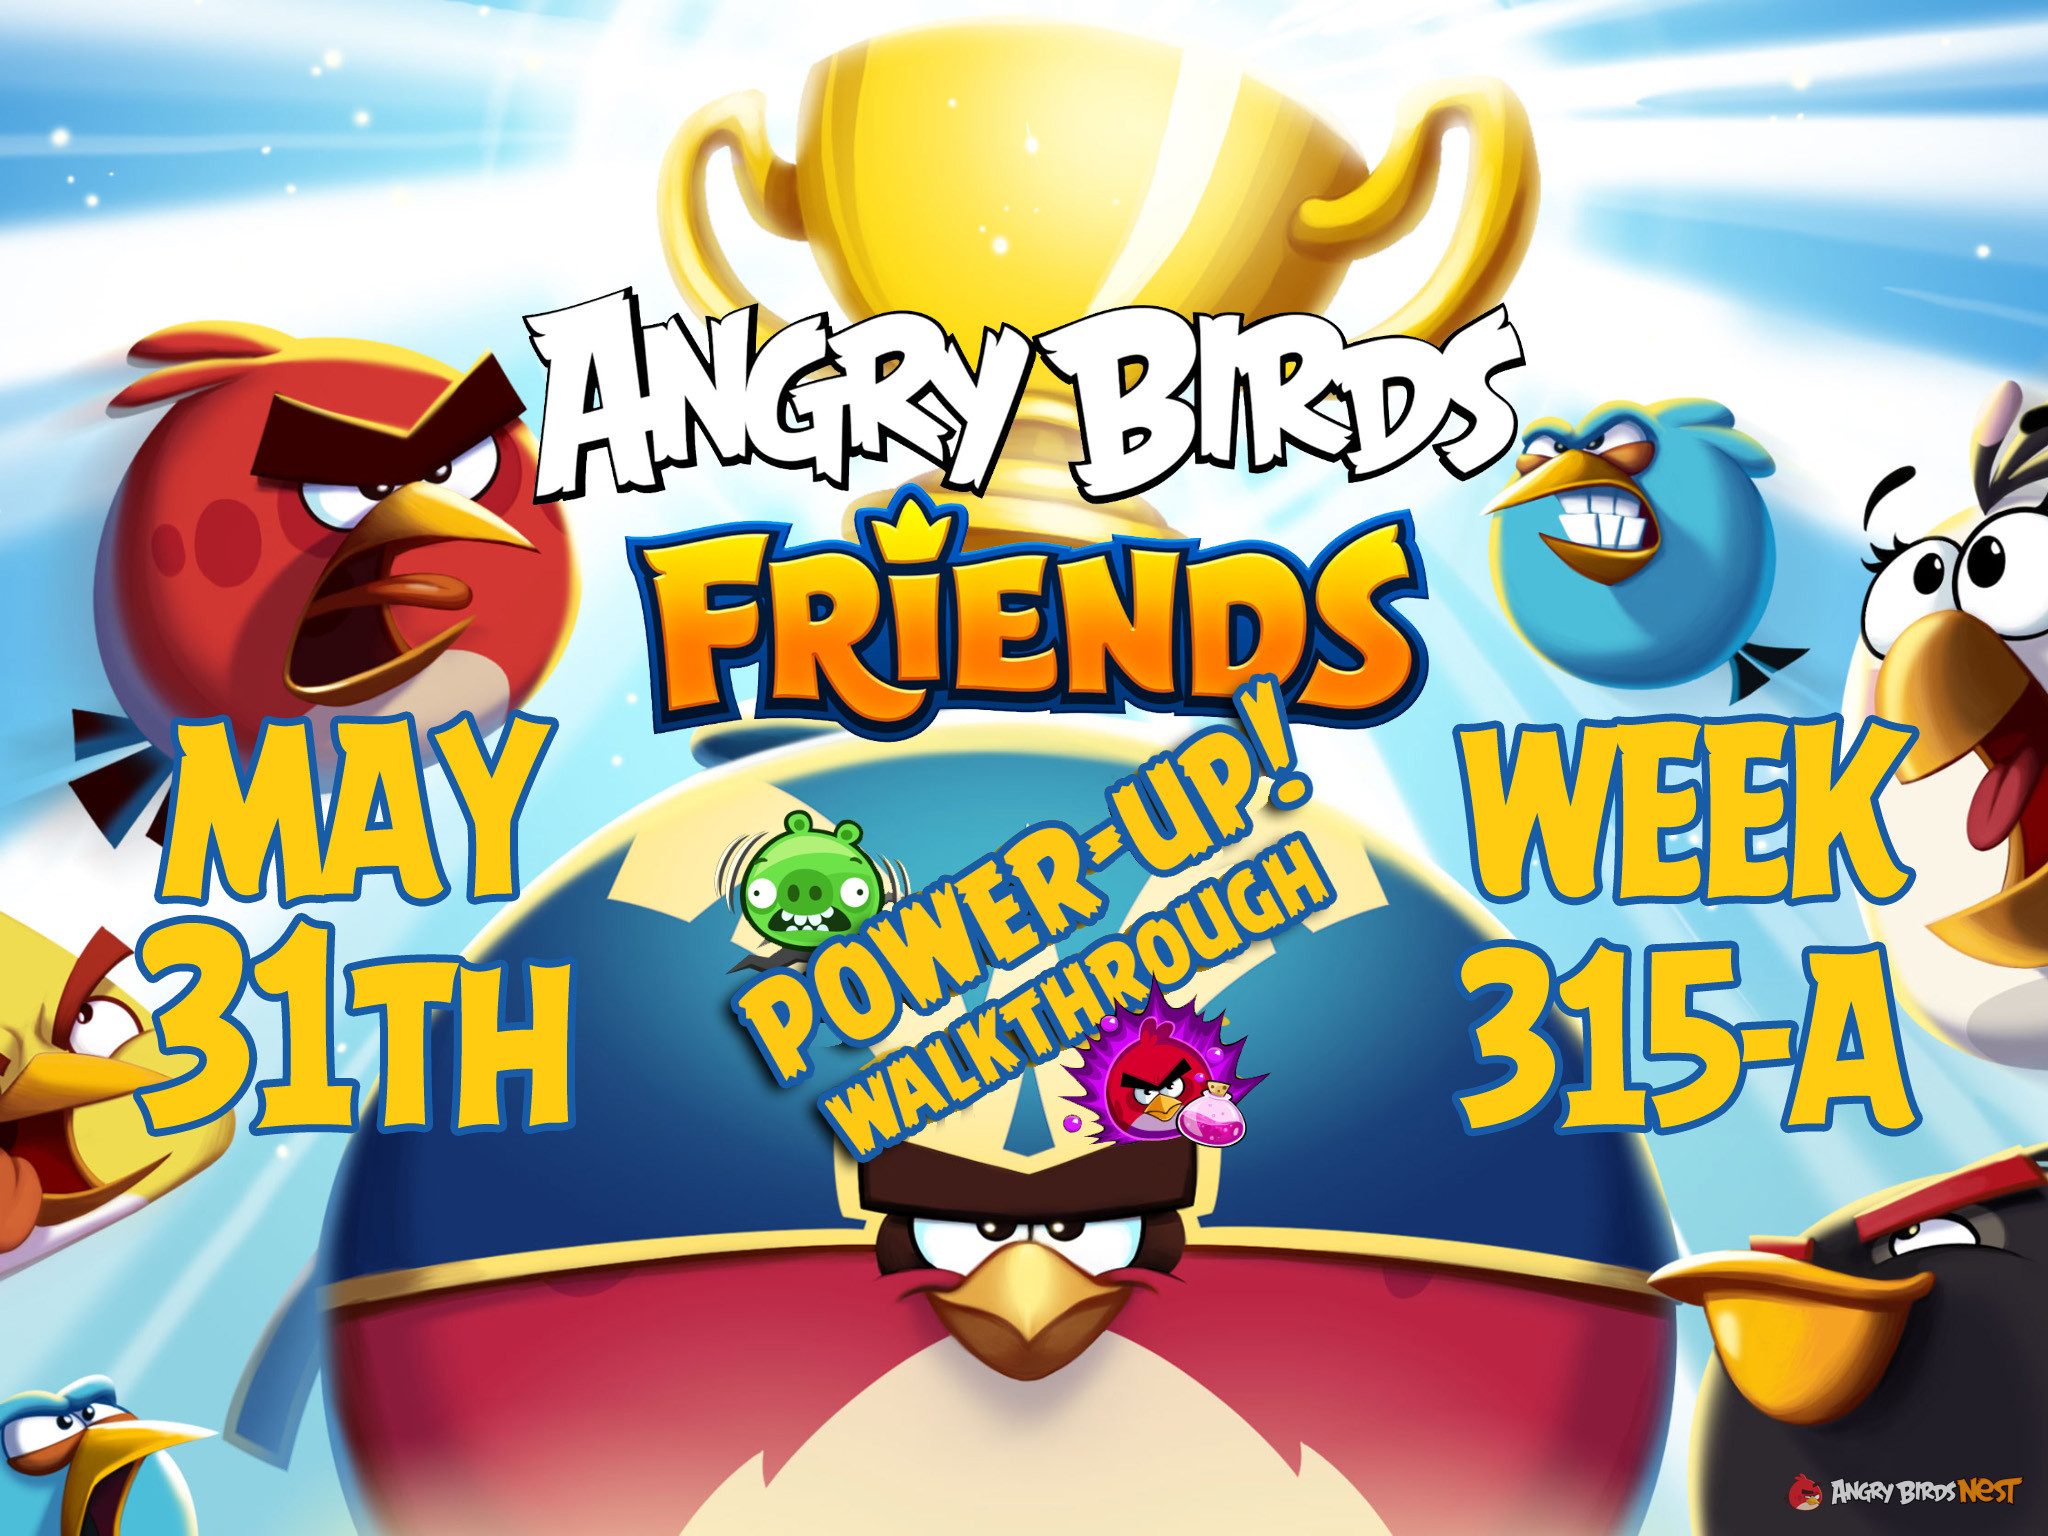 Angry Birds Friends Tournament Week 315-A Feature Image PU